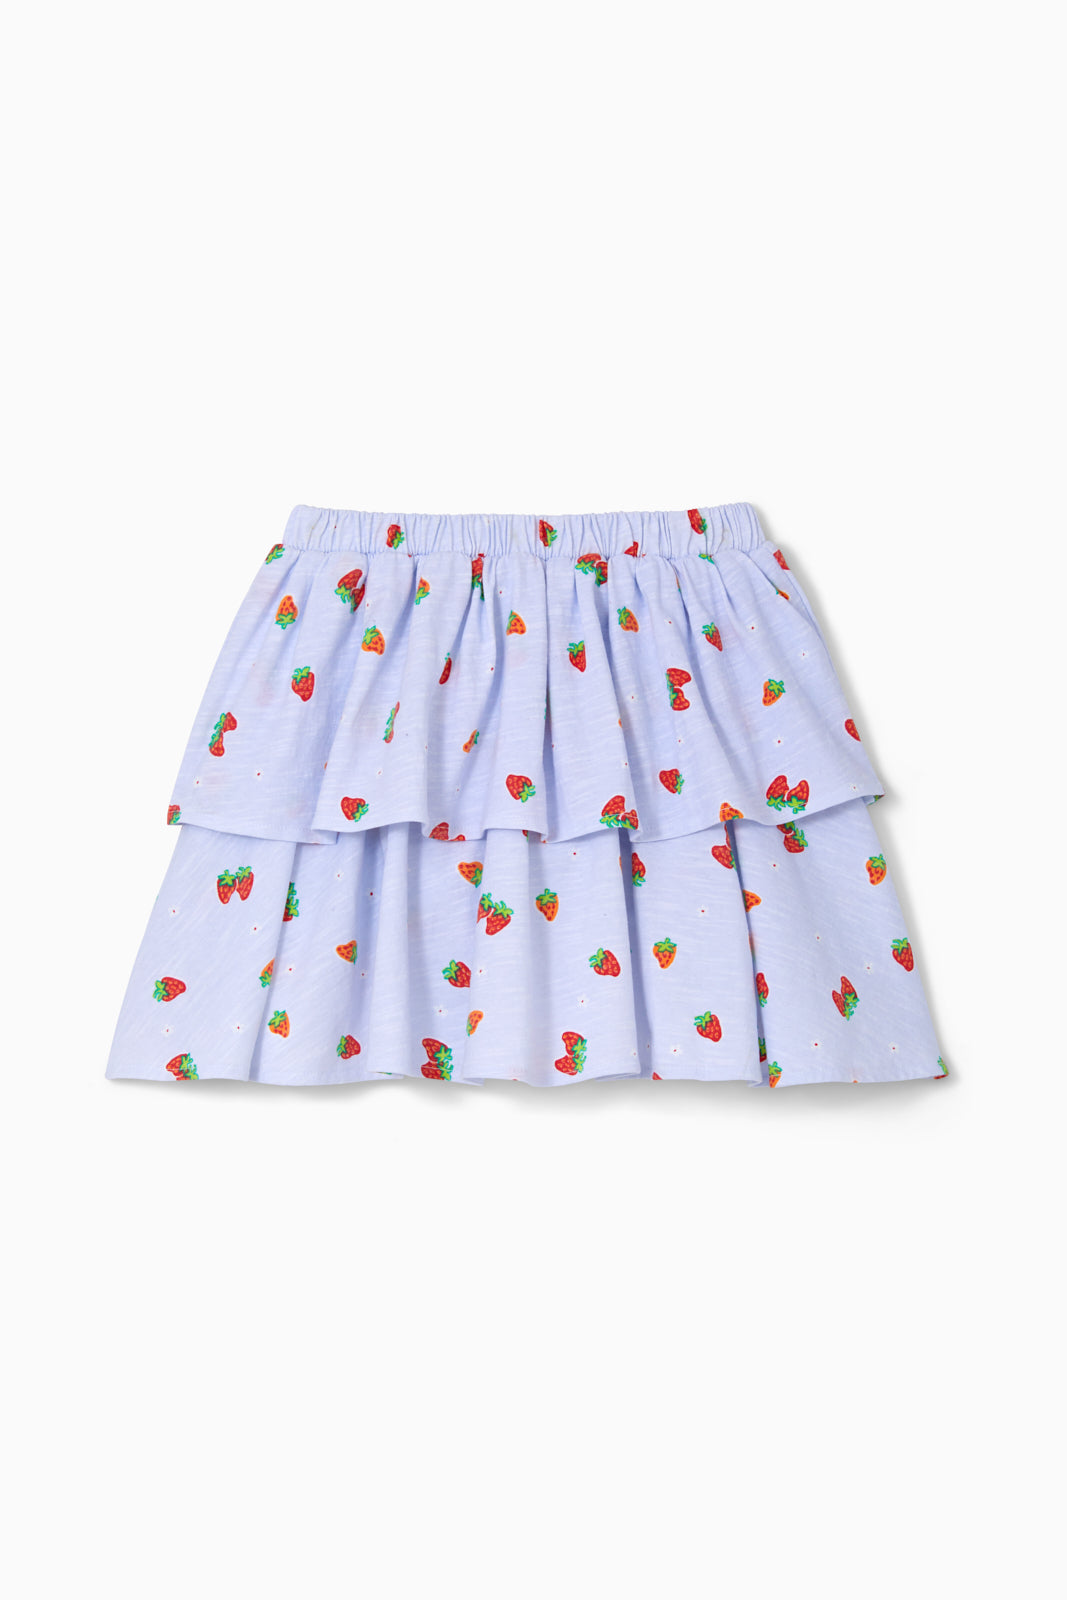 Strawberry Skirt – Rockets of Awesome